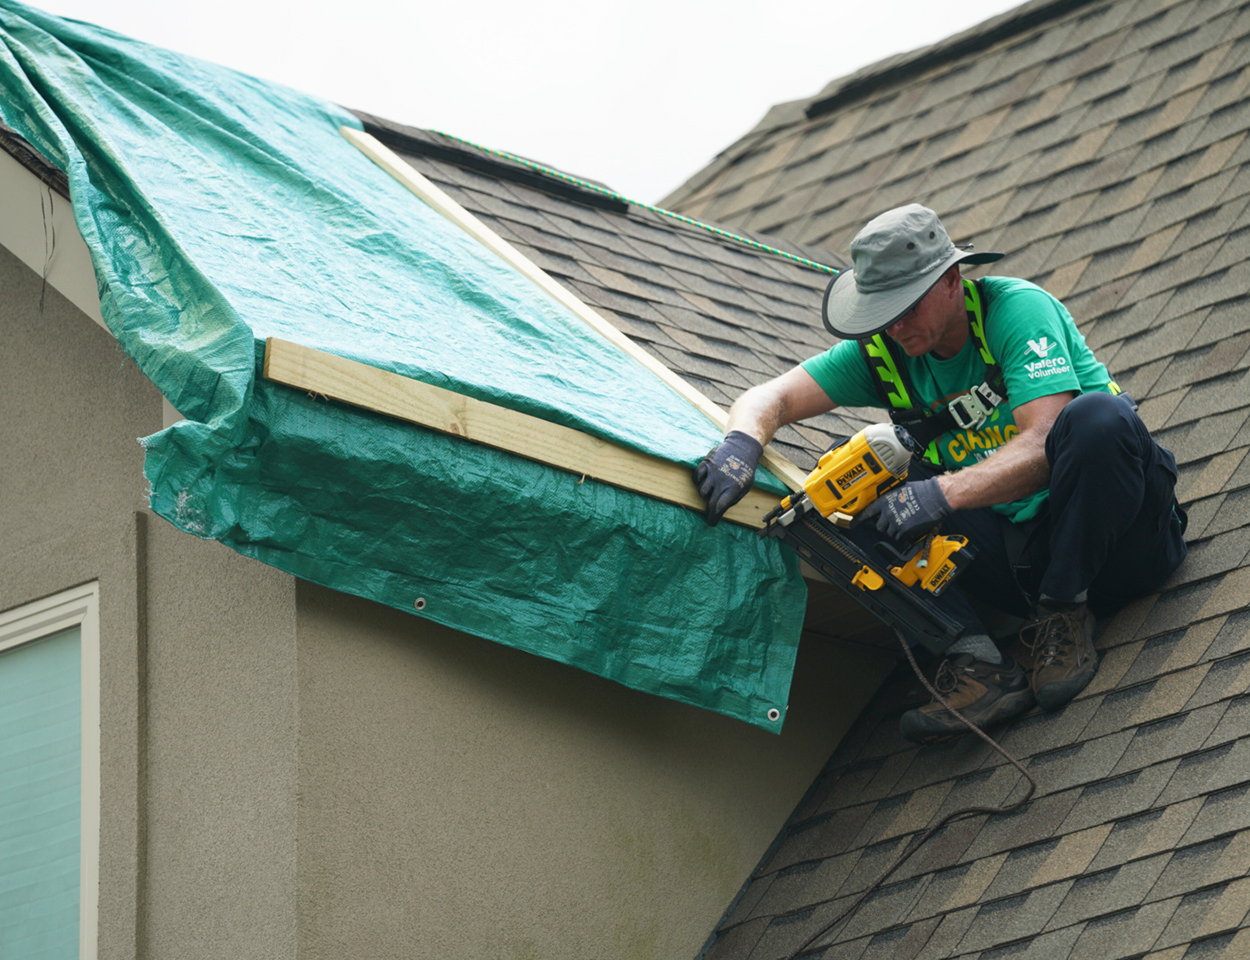 Valero volunteer on top of a home's roof fixing damages